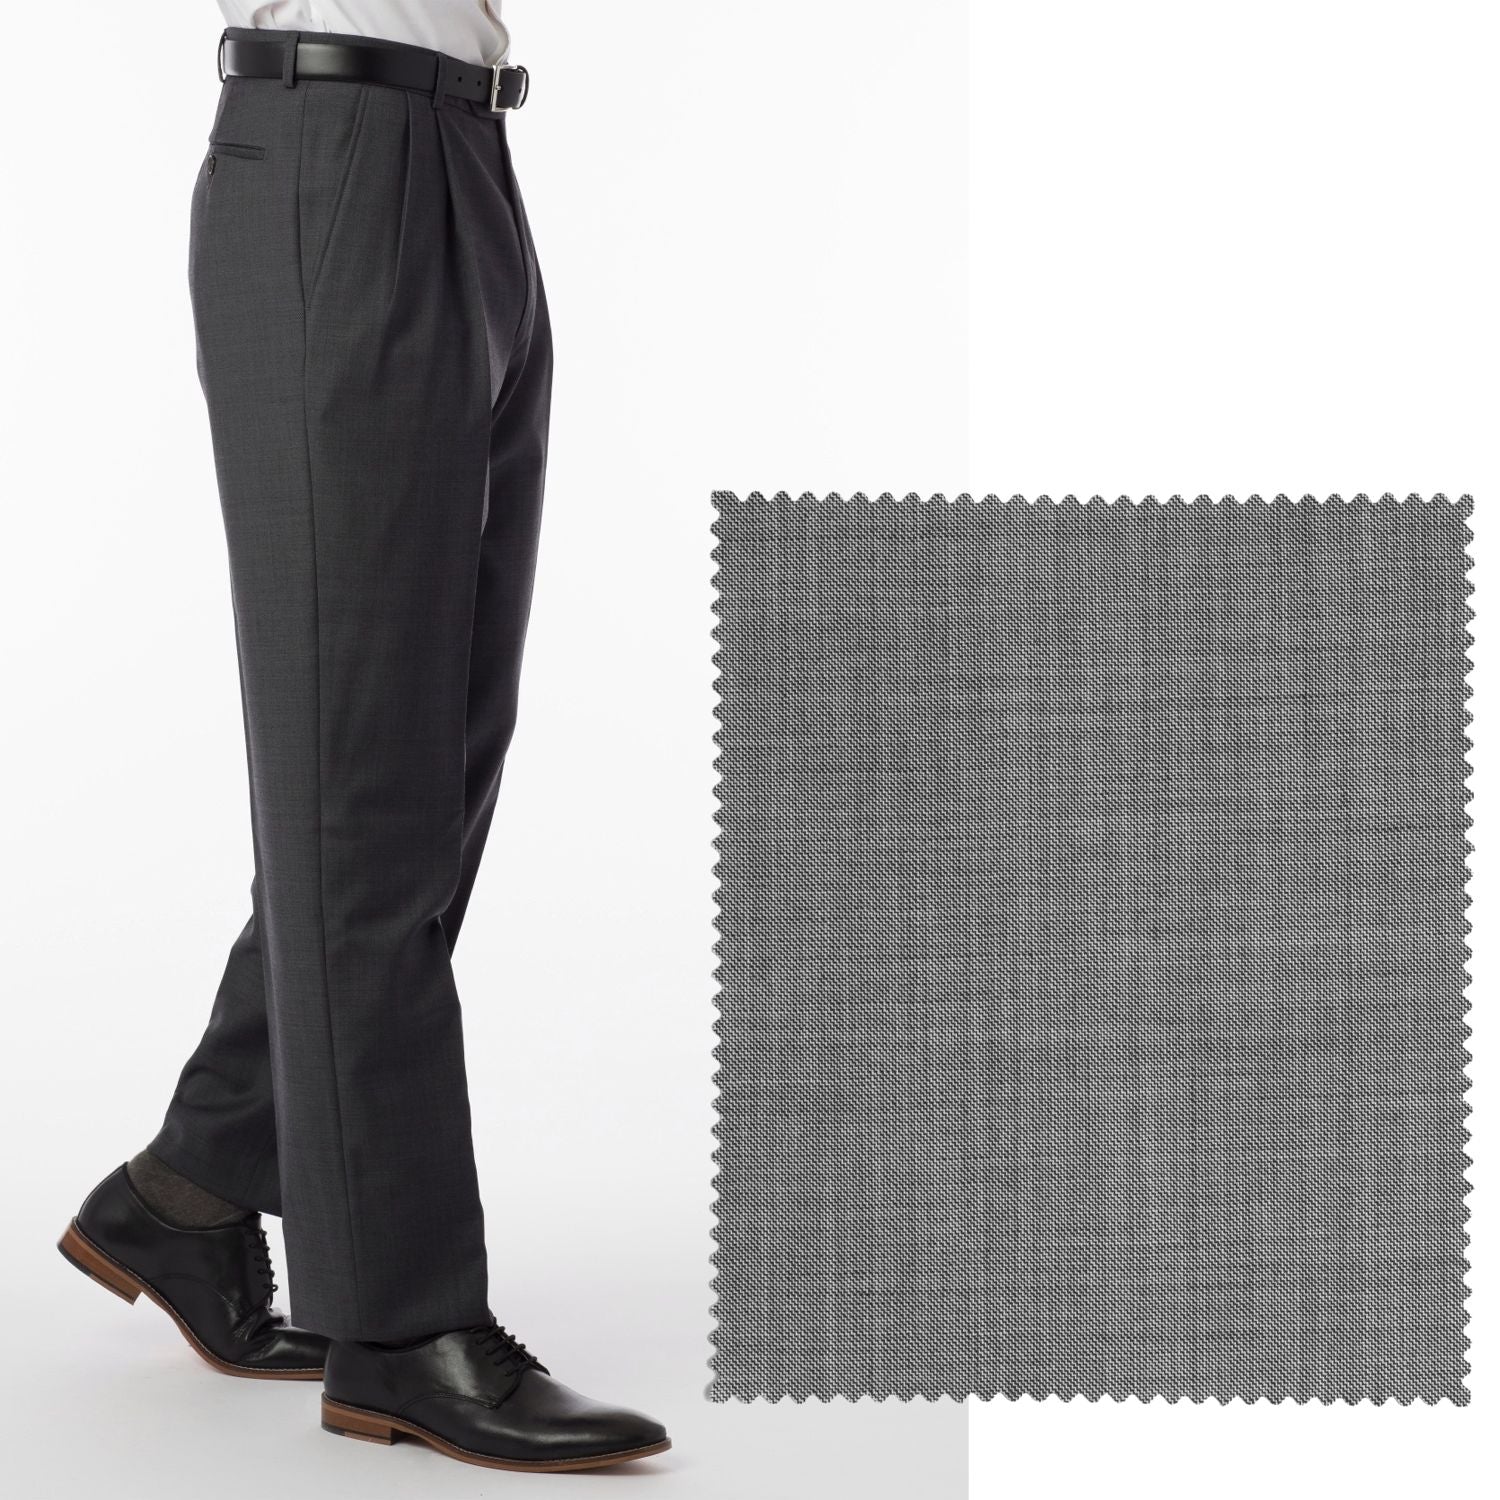 BIG FIT Sharkskin Super 120s Worsted Wool Comfort-EZE Trouser in Black and White (Manchester Pleated Model) by Ballin